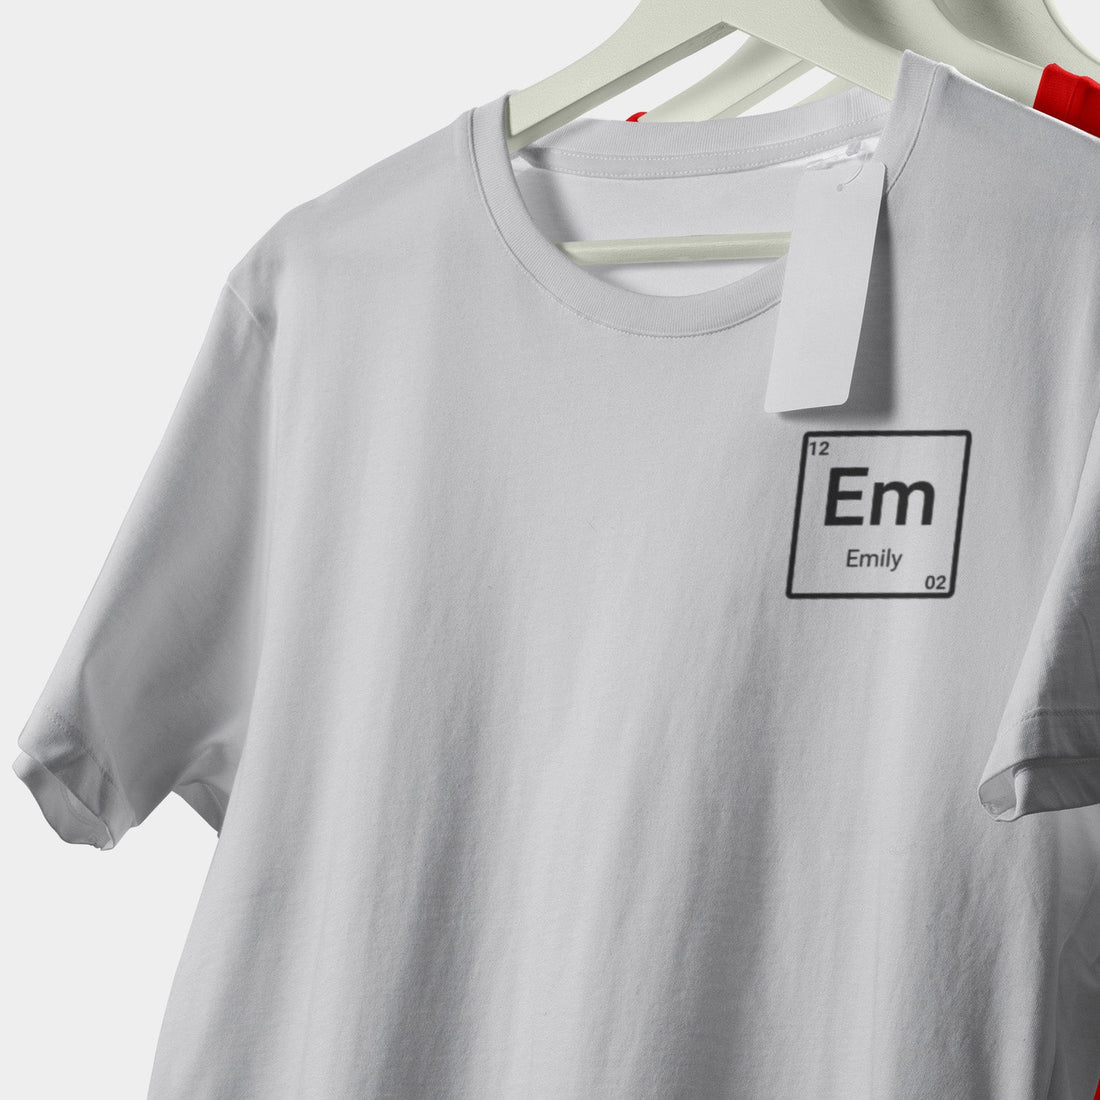 Personalisiertes T-Shirt Name Chemie Element Periodensystem